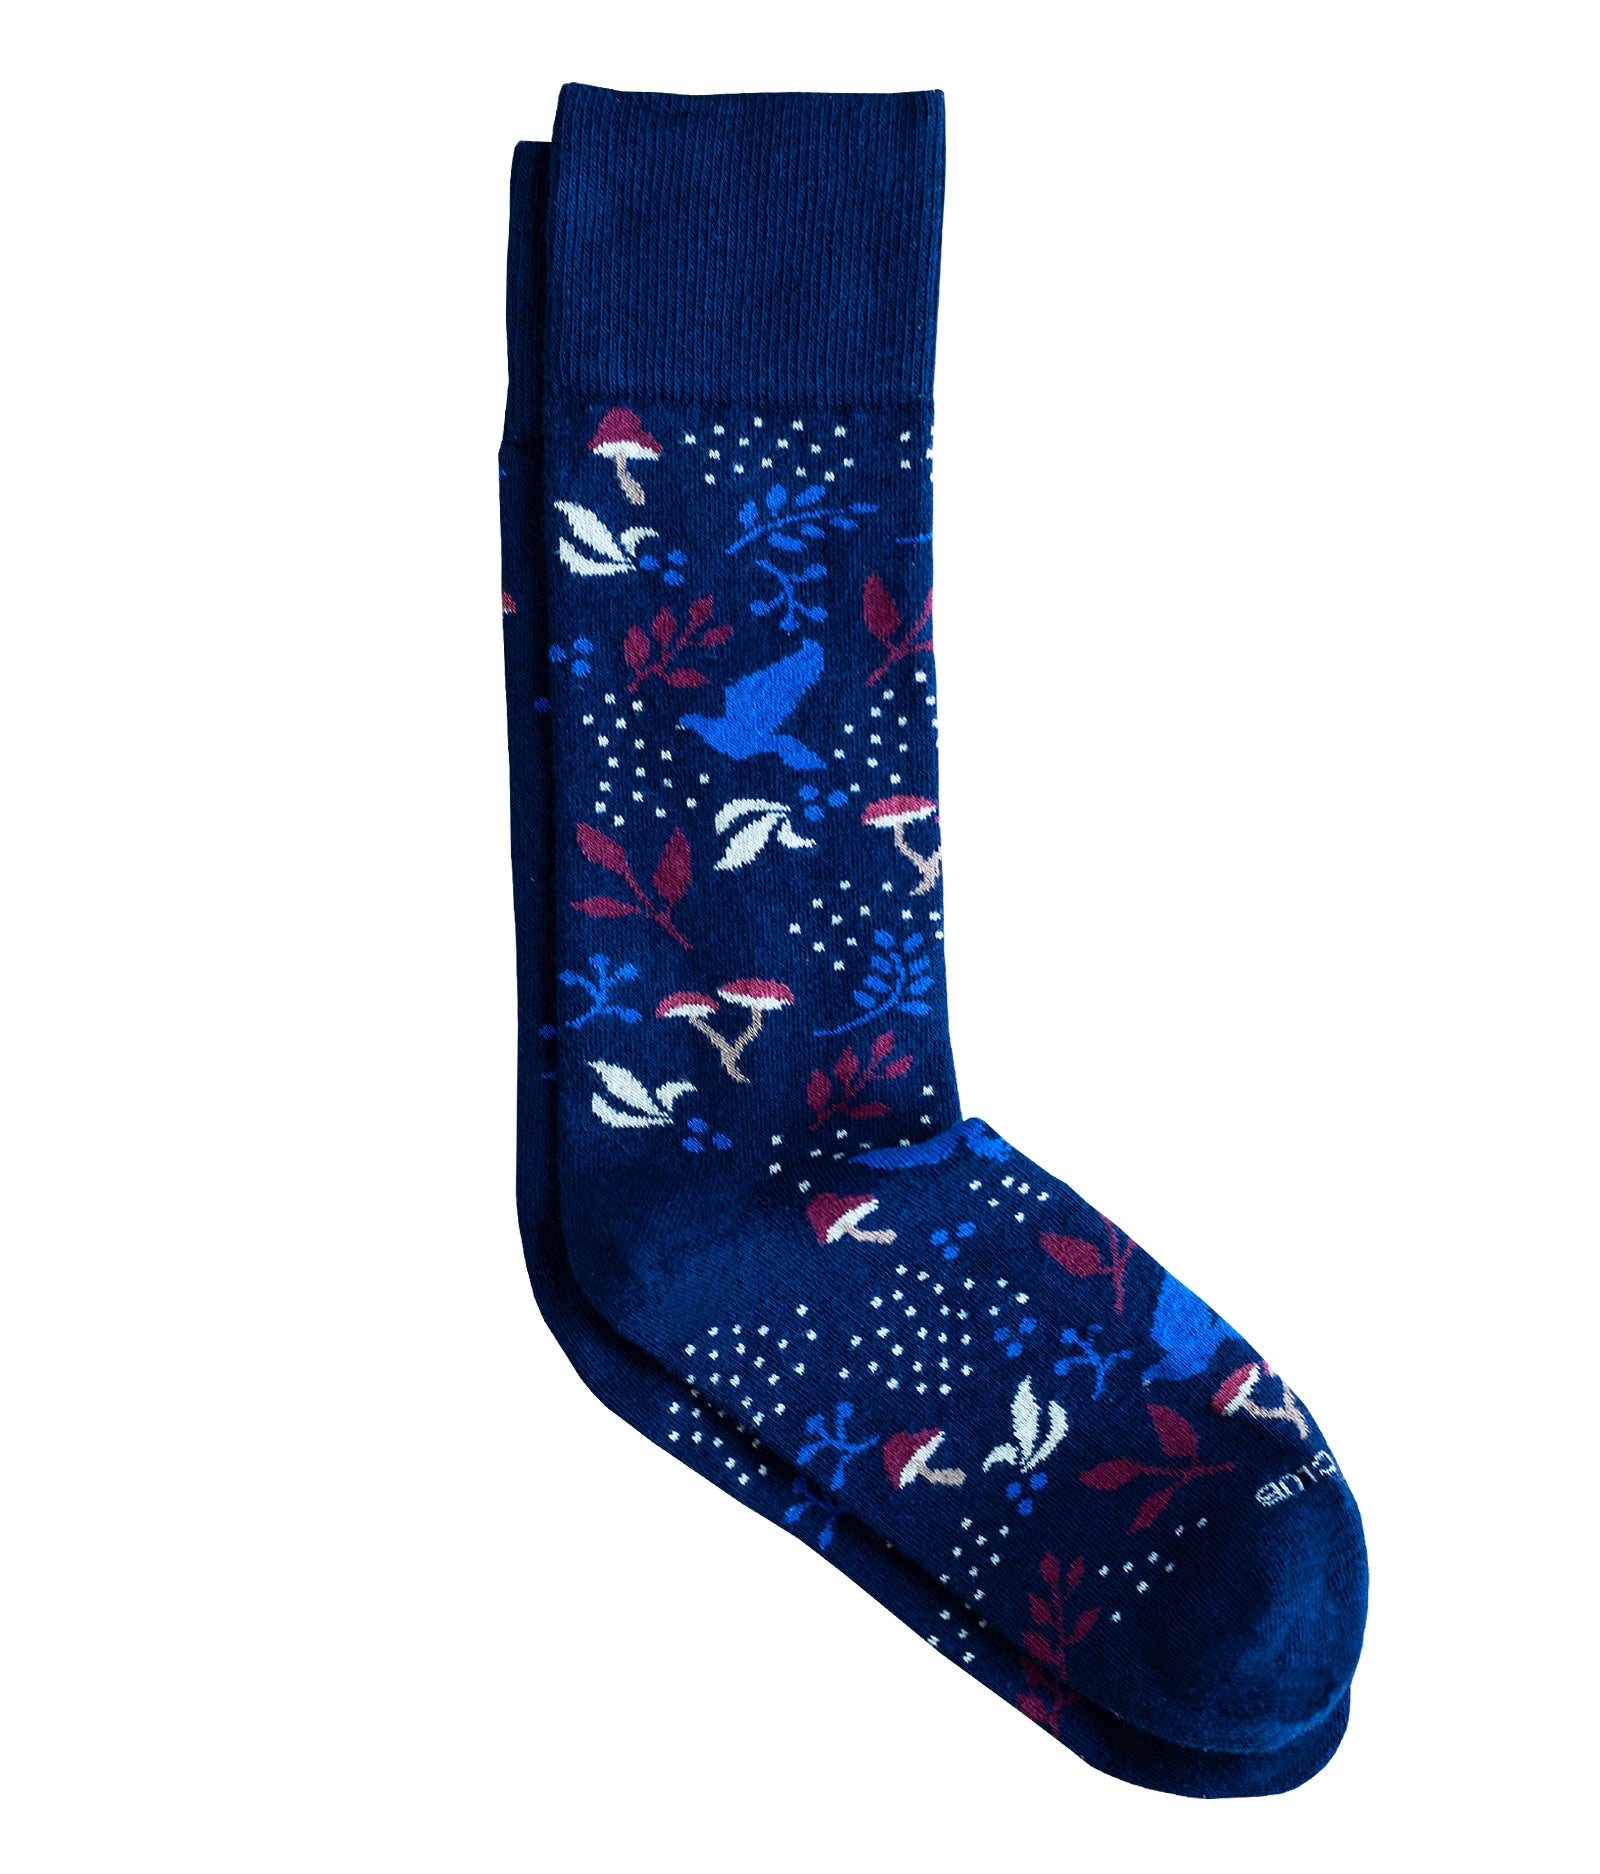 The Woodland sock in the Navy color variation that features mushrooms and leaves.